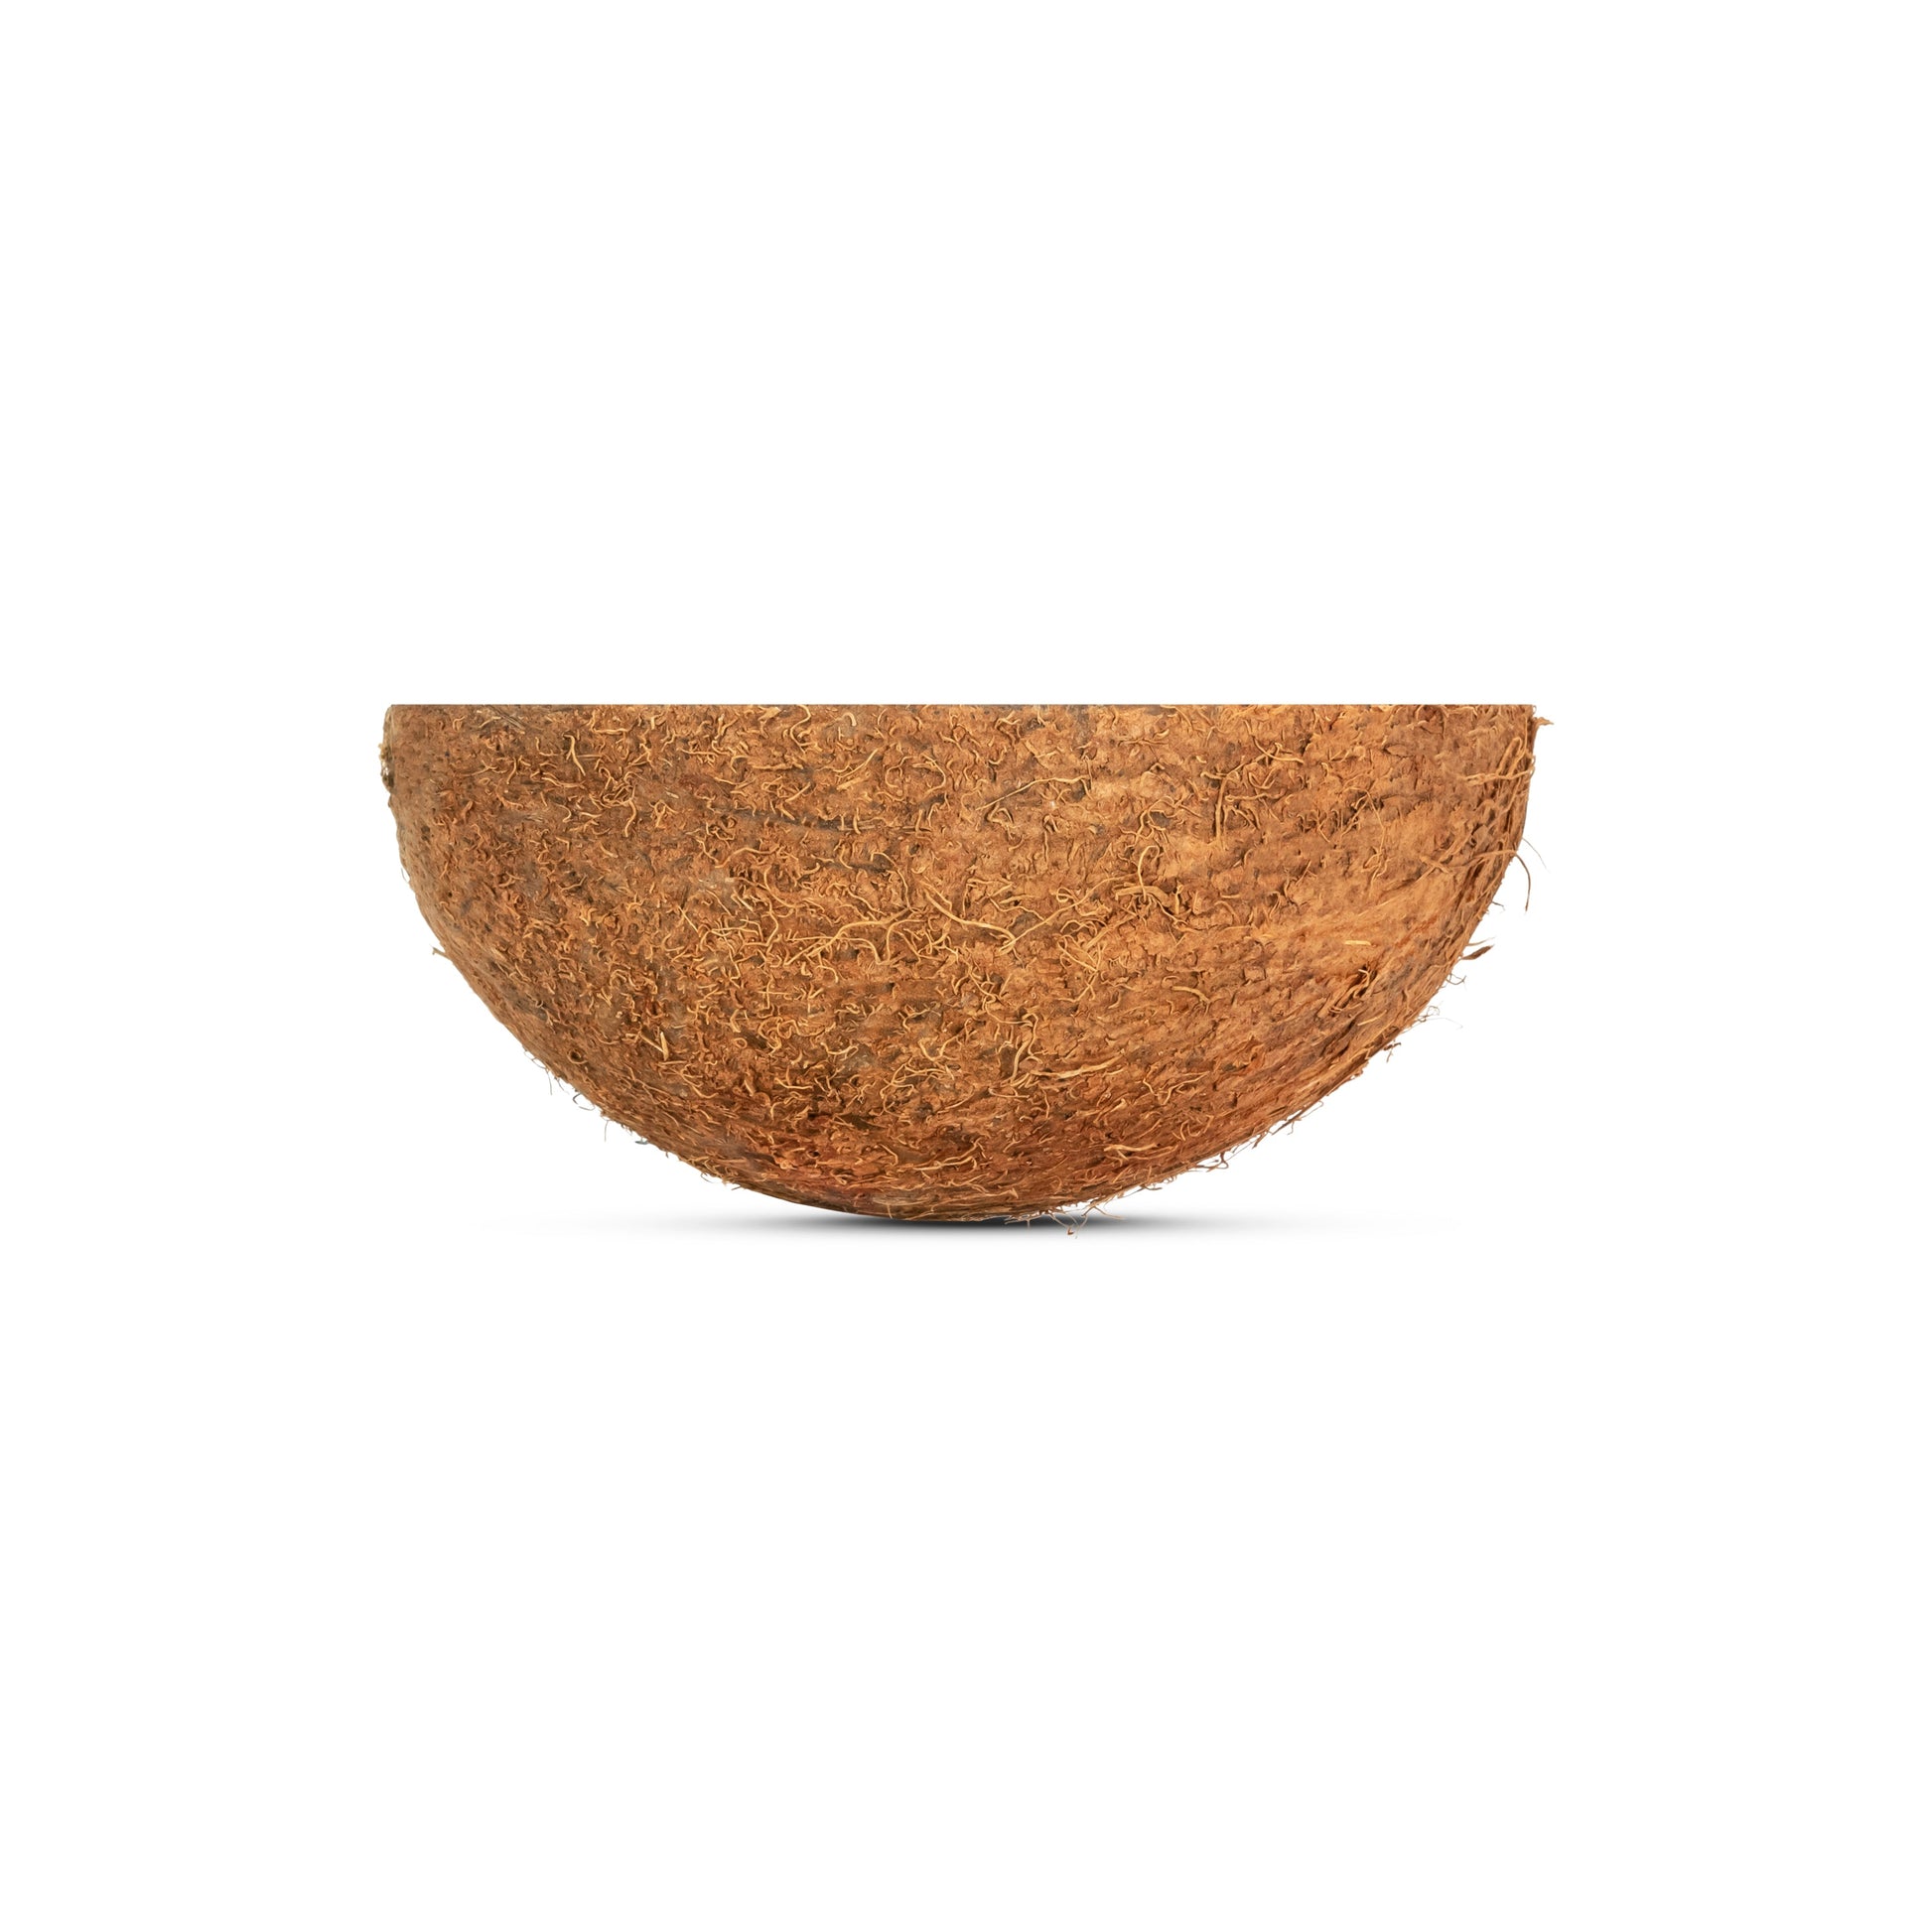 front of coconut cup with fiber